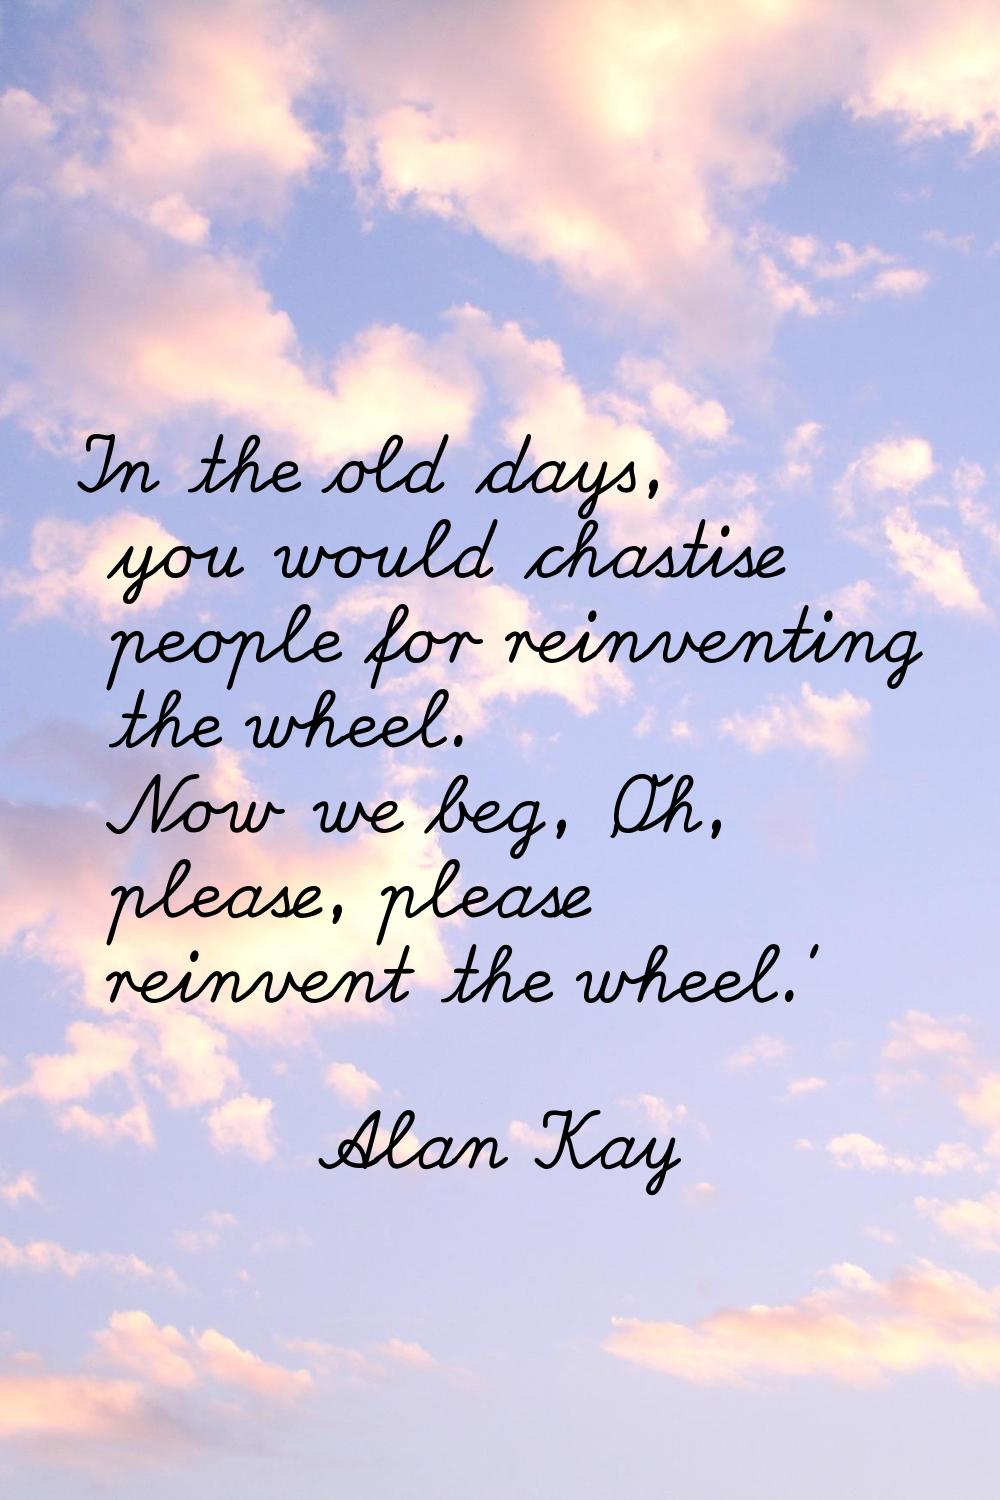 In the old days, you would chastise people for reinventing the wheel. Now we beg, 'Oh, please, plea